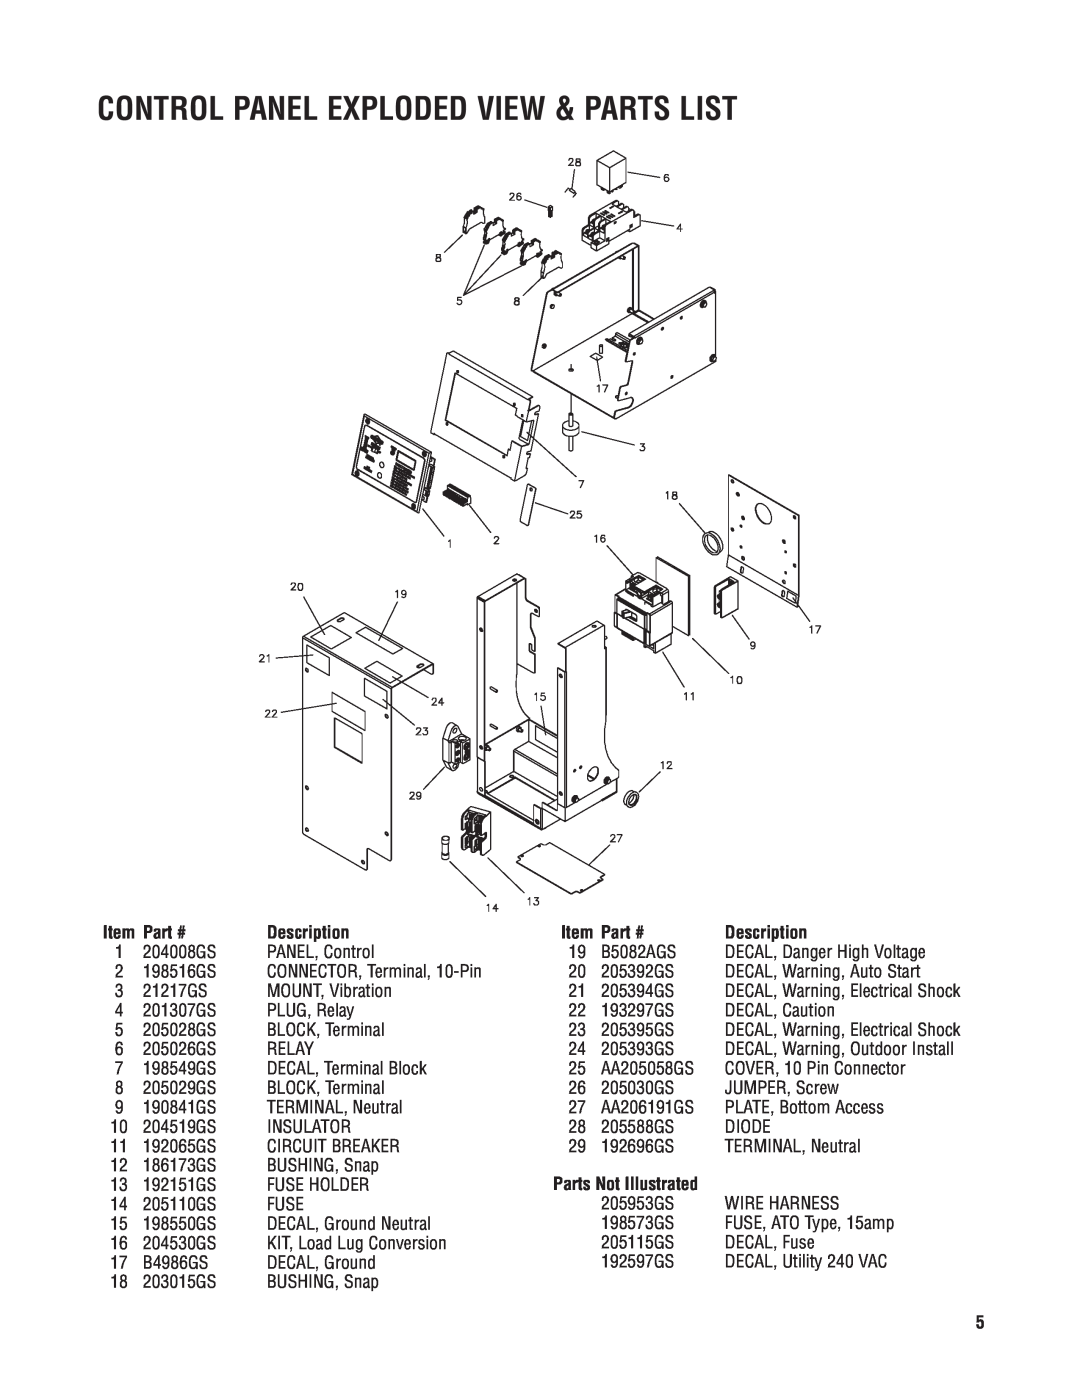 Briggs & Stratton 76001 manual Control Panel Exploded View & Parts List, Description, Parts Not Illustrated 